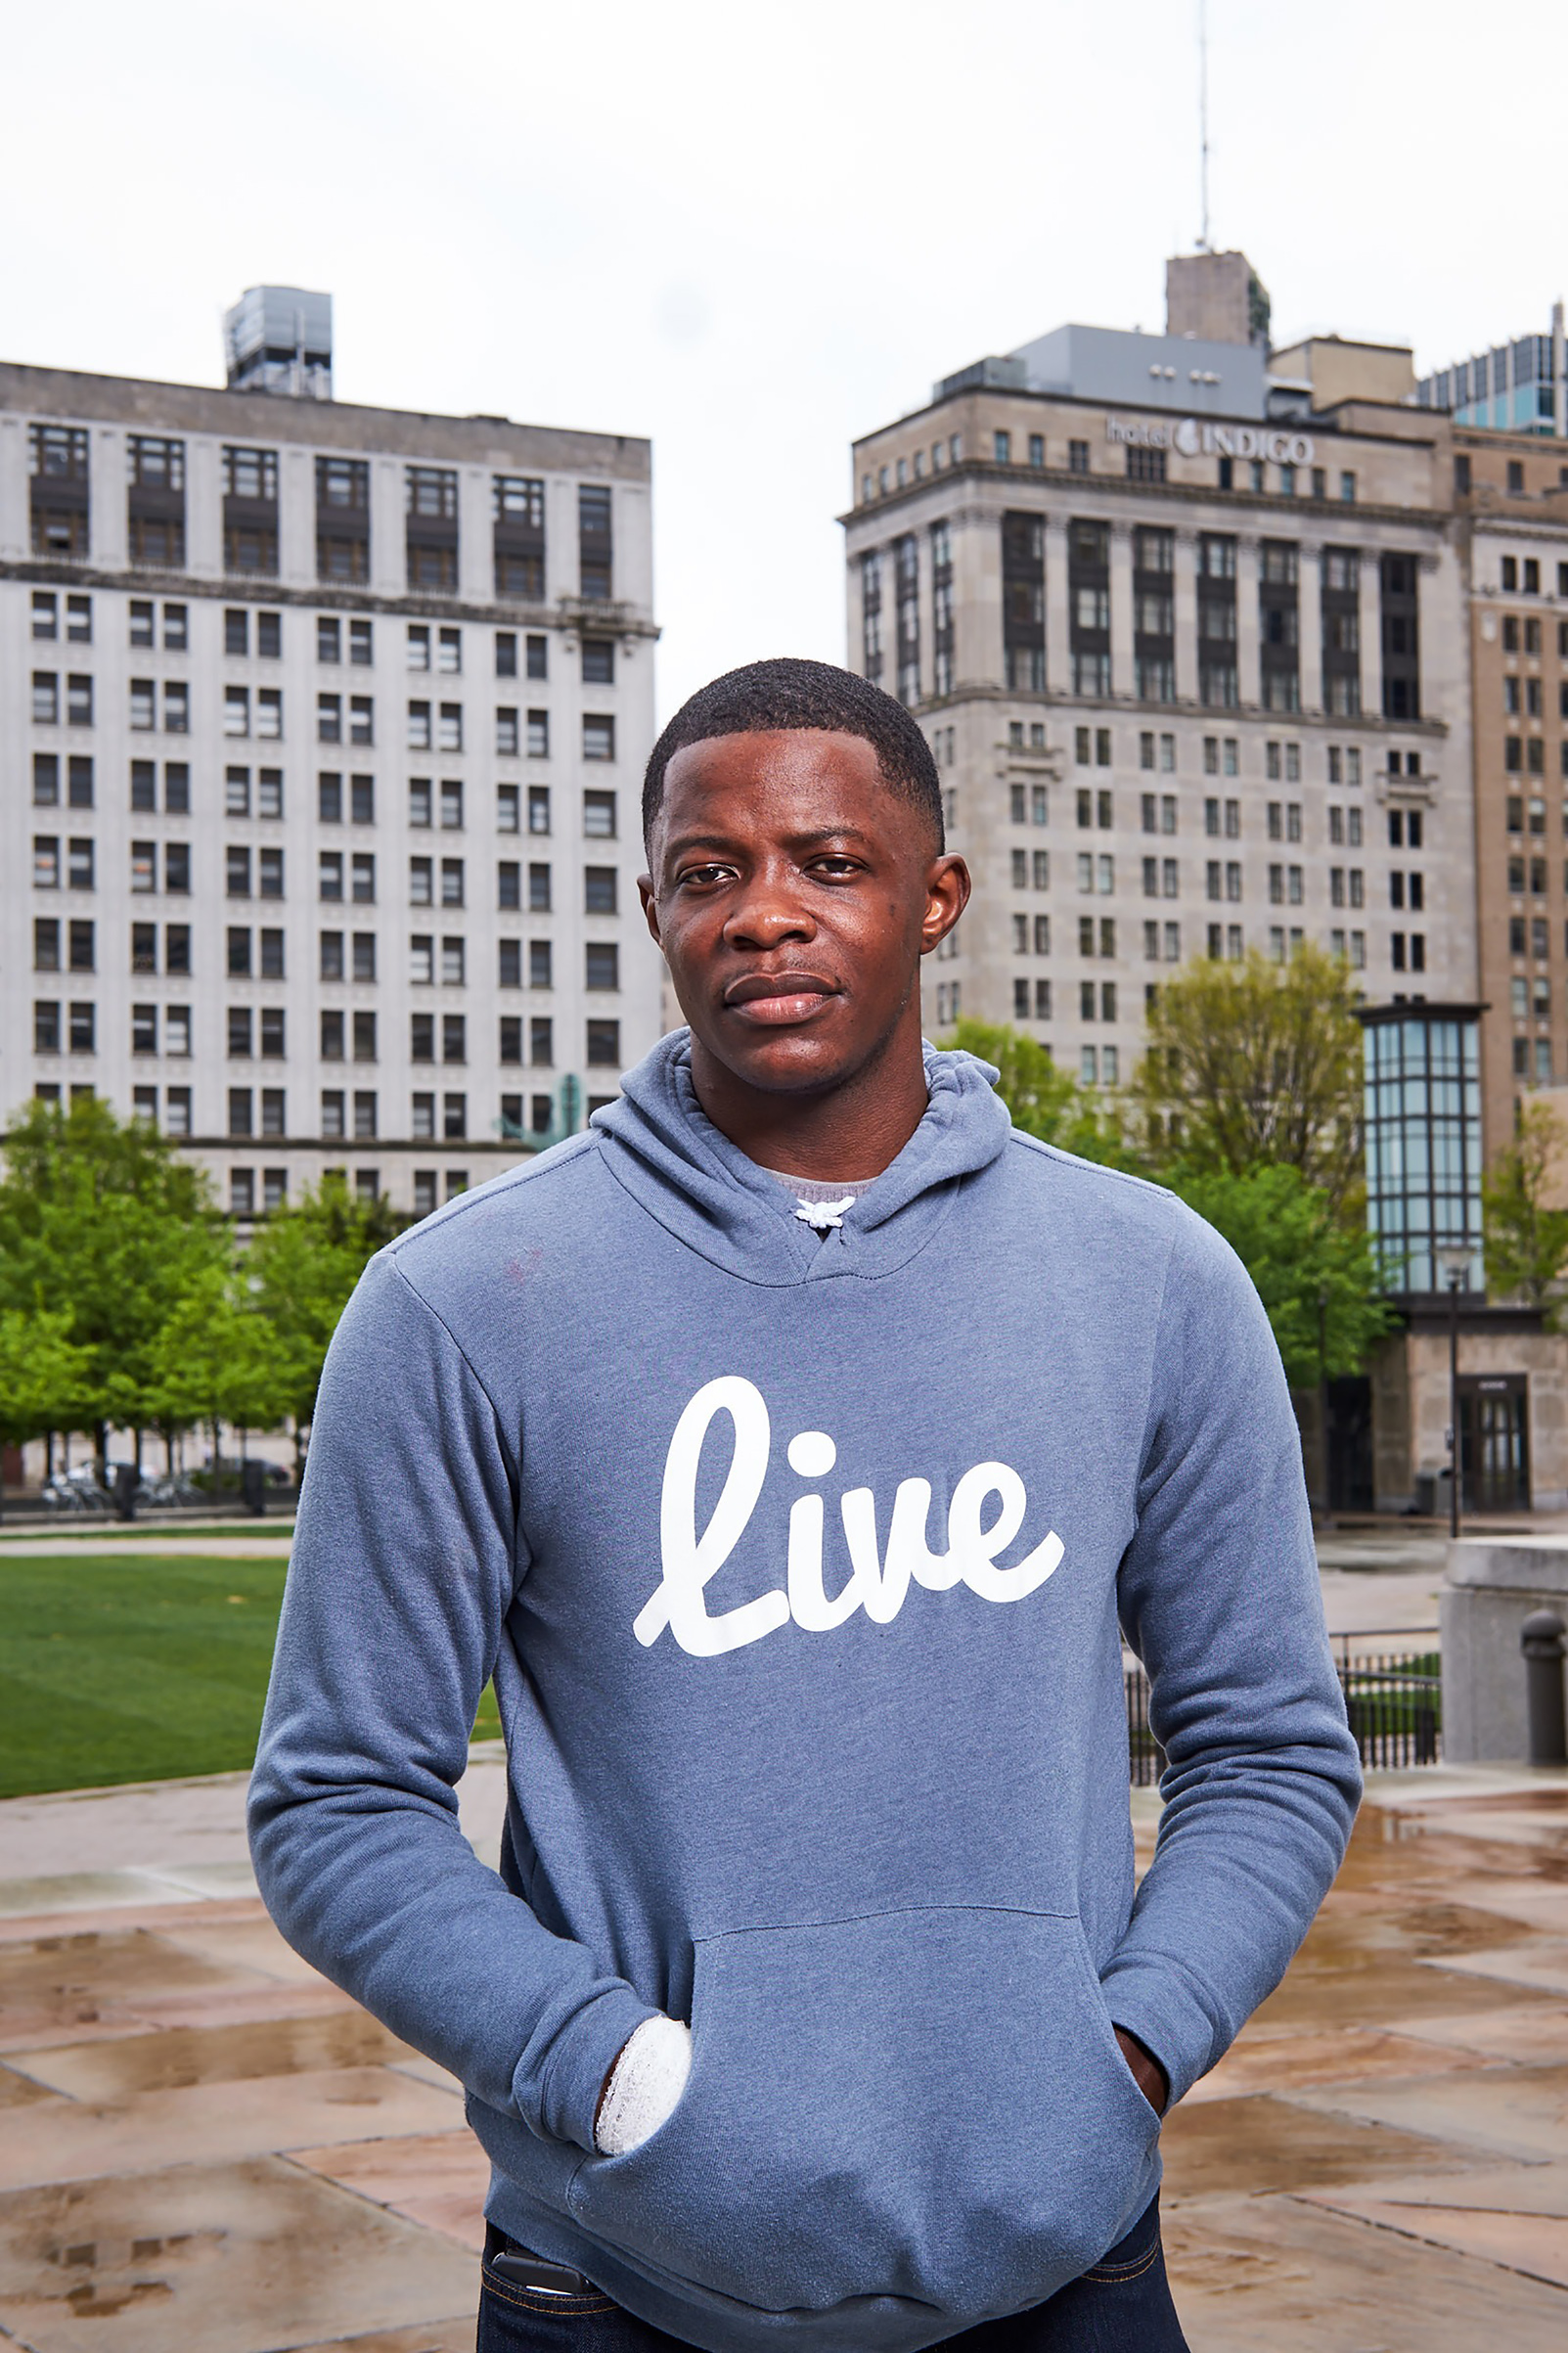 James Shaw Jr., who disarmed the man who opened fire at a Waffle House Sunday morning, in Nashville on April 23, 2018.